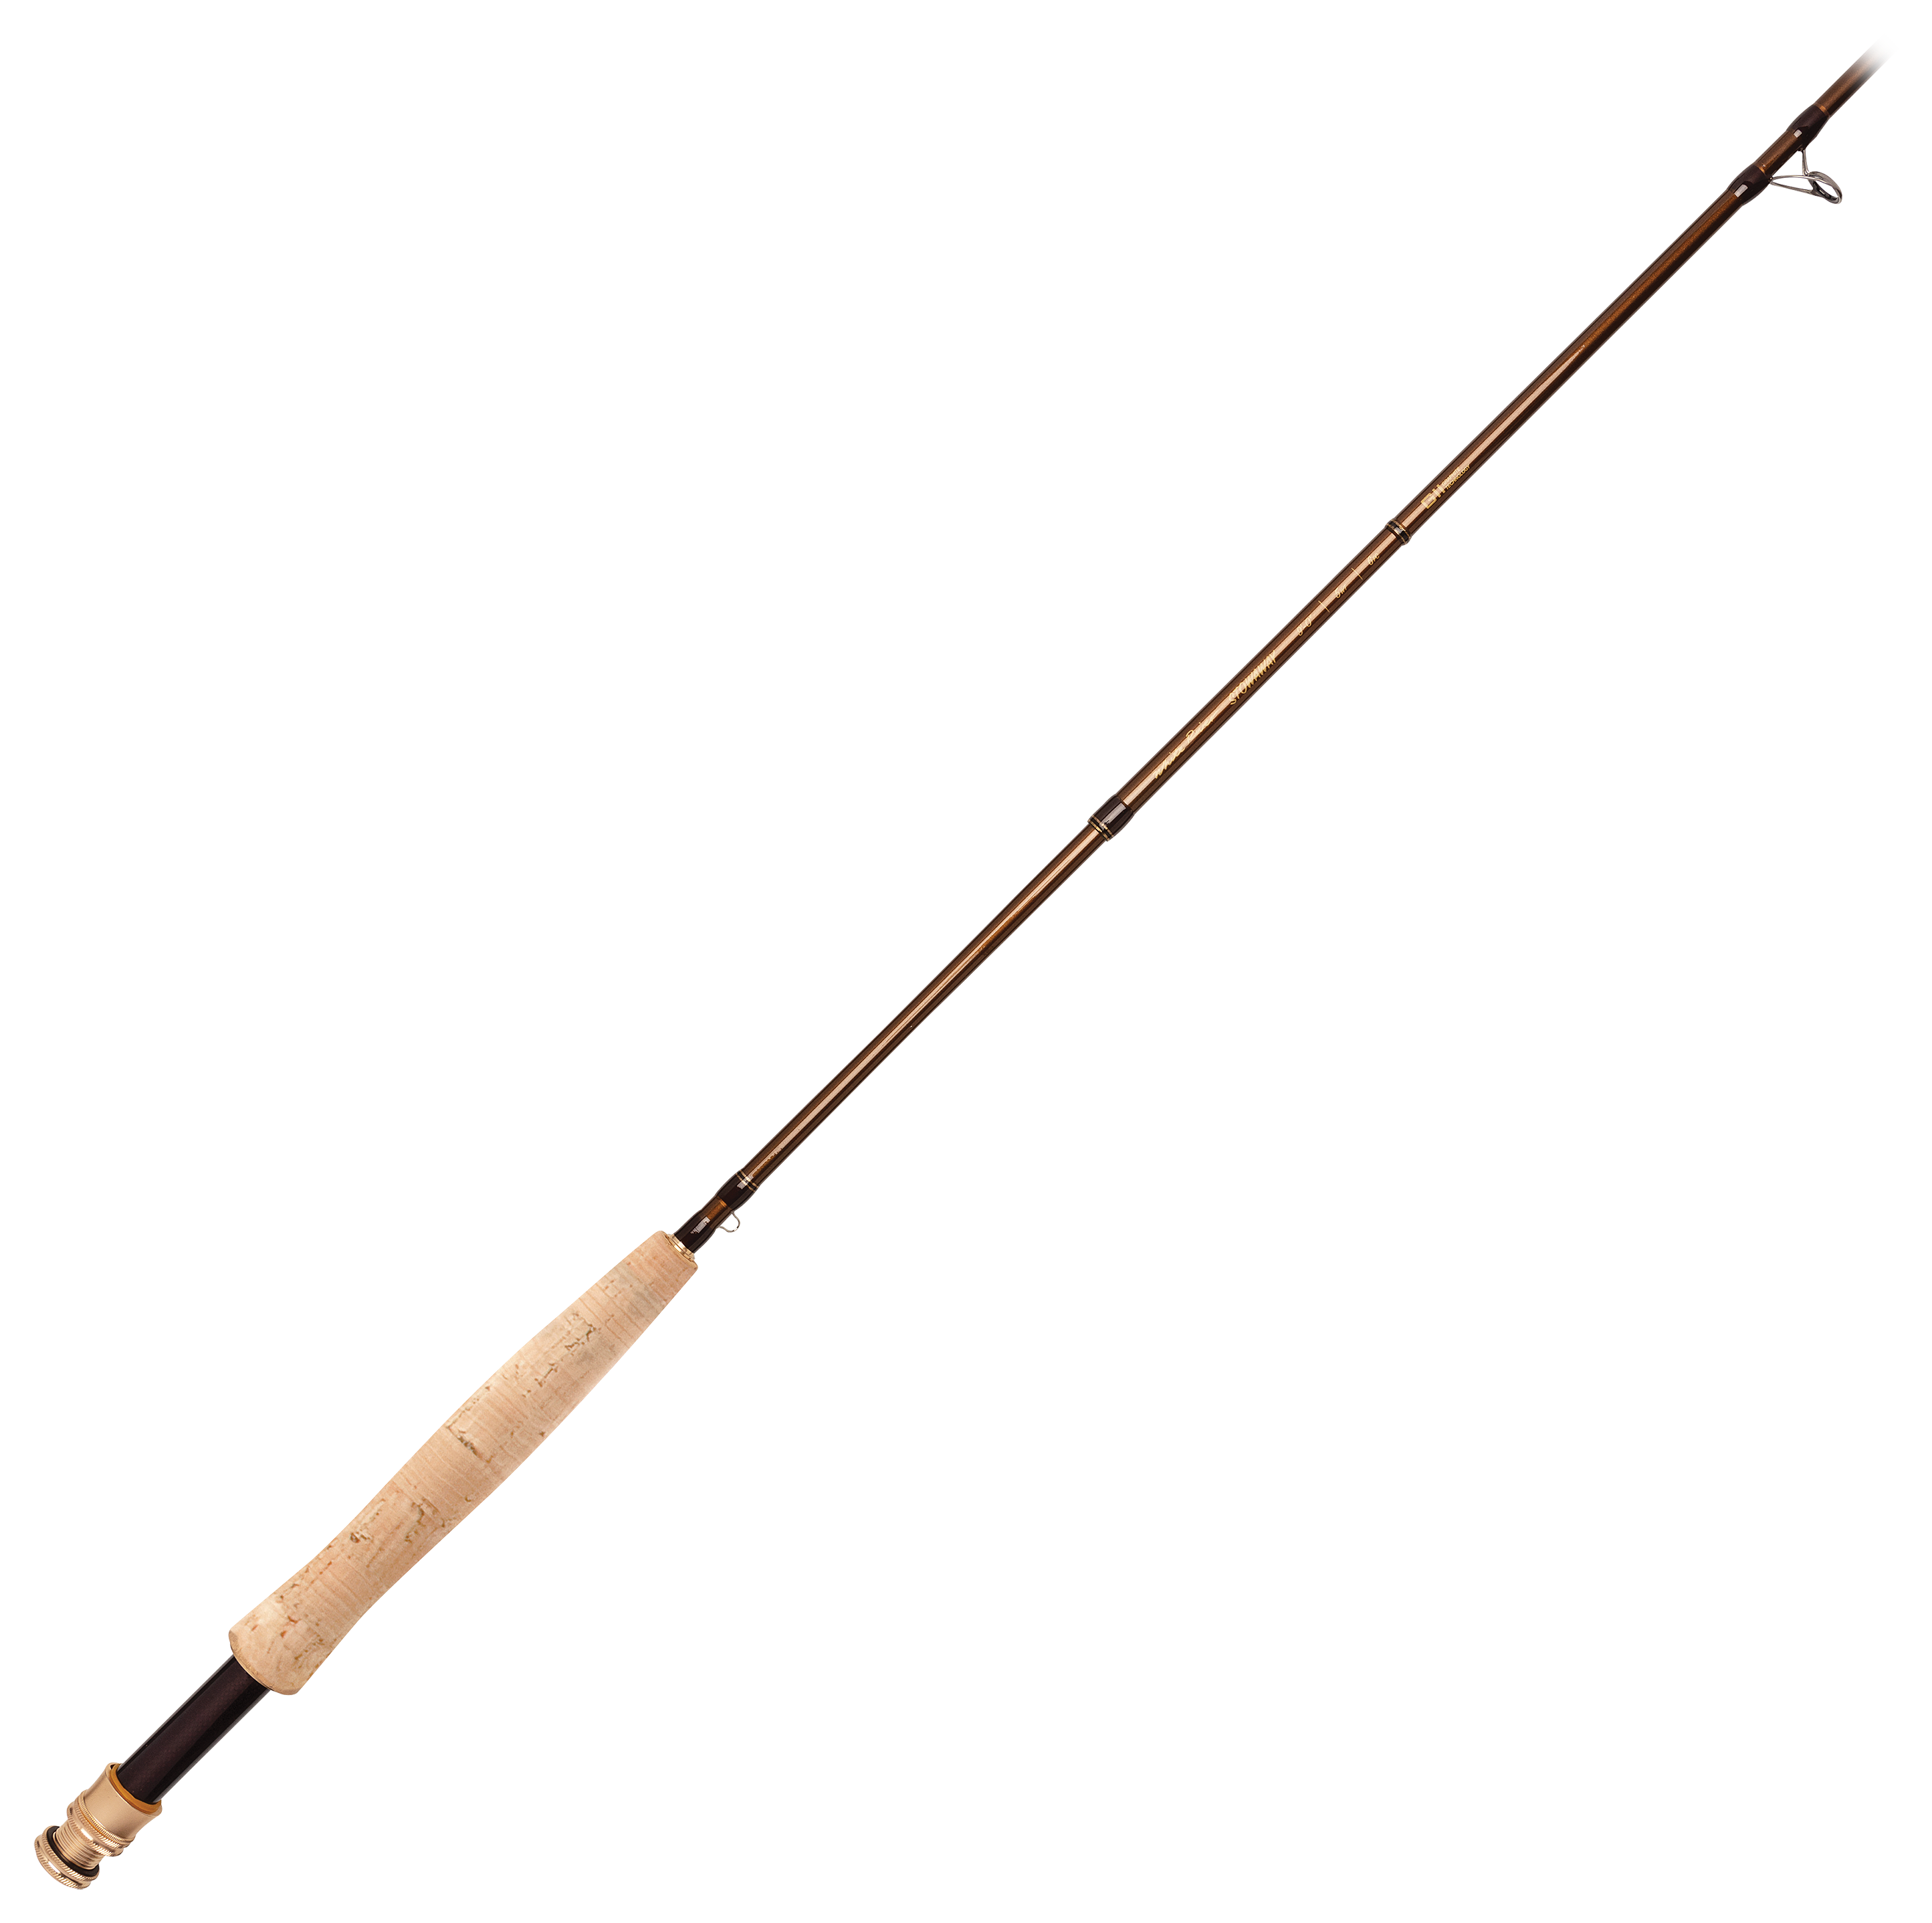  New Bamboo Fly Rod 7'6 for #5 Line Wt,2 Piece with 2 Tips. :  Sports & Outdoors